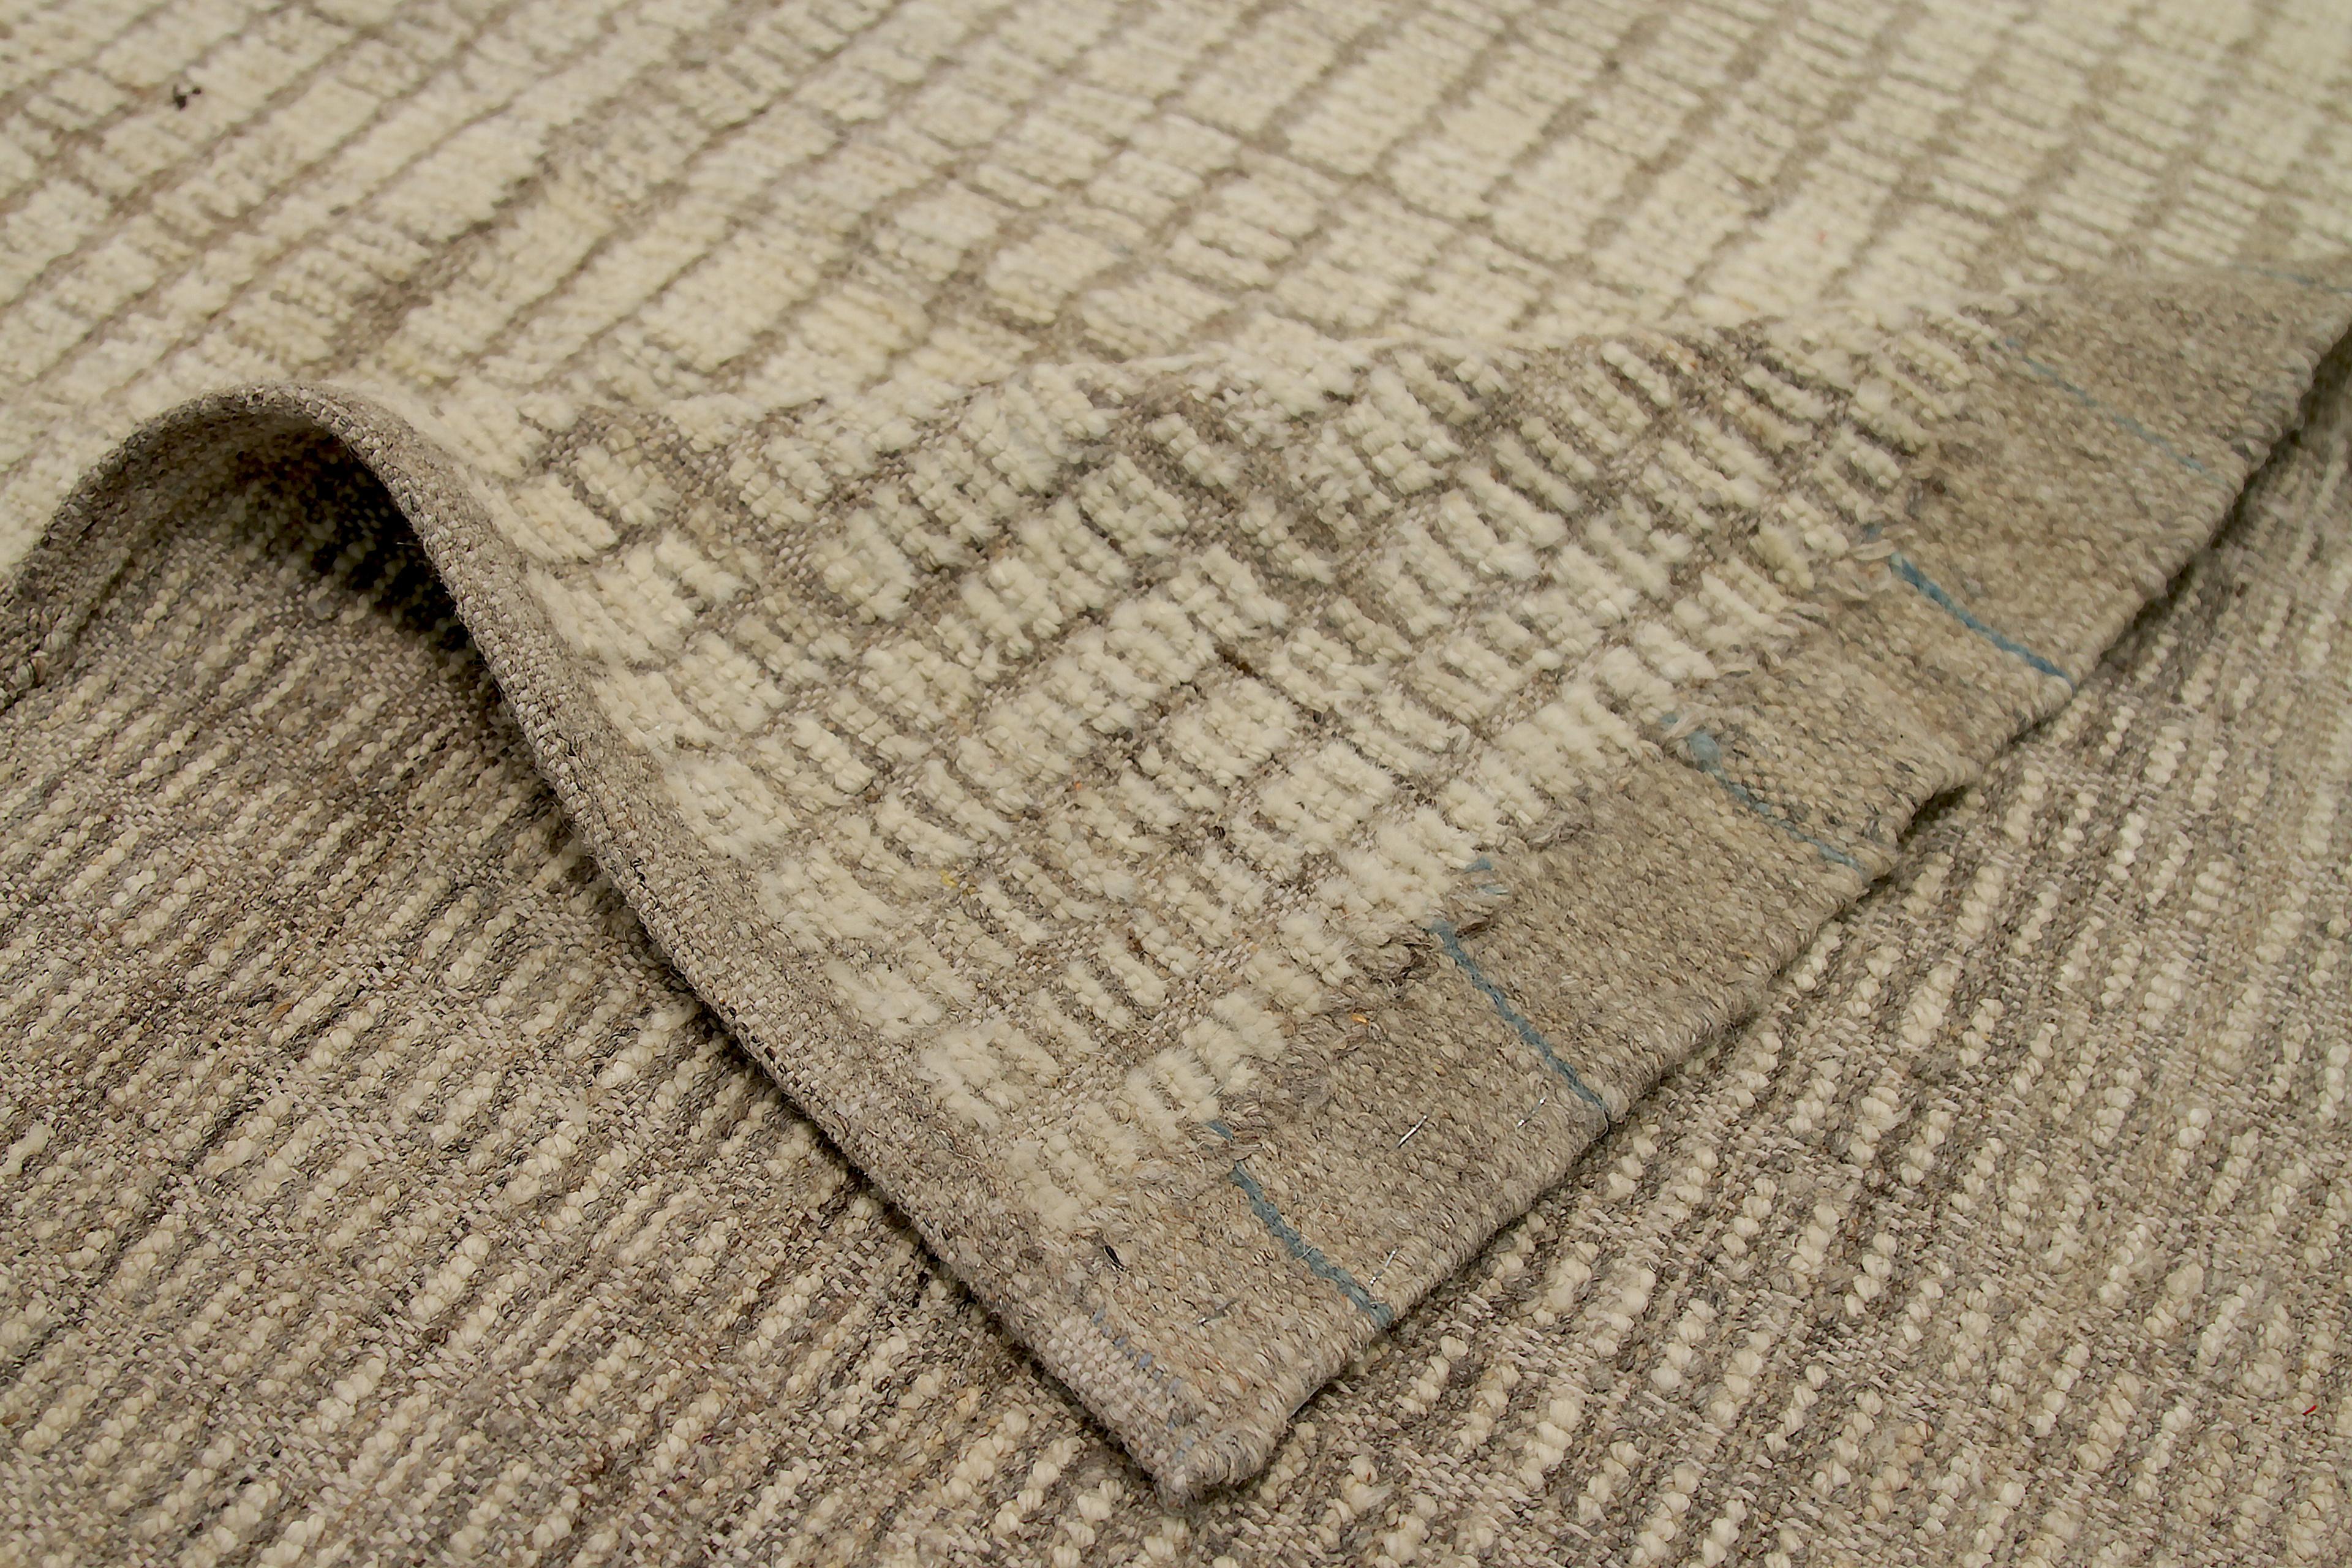 Fascinating Beige Color Textured Modern Distressed Rug, Country of Origin: Afghanistan, Circa Date: Modern. Size: 10 ft 4 in x 13 ft 7 in (3.15 m x 4.14 m)